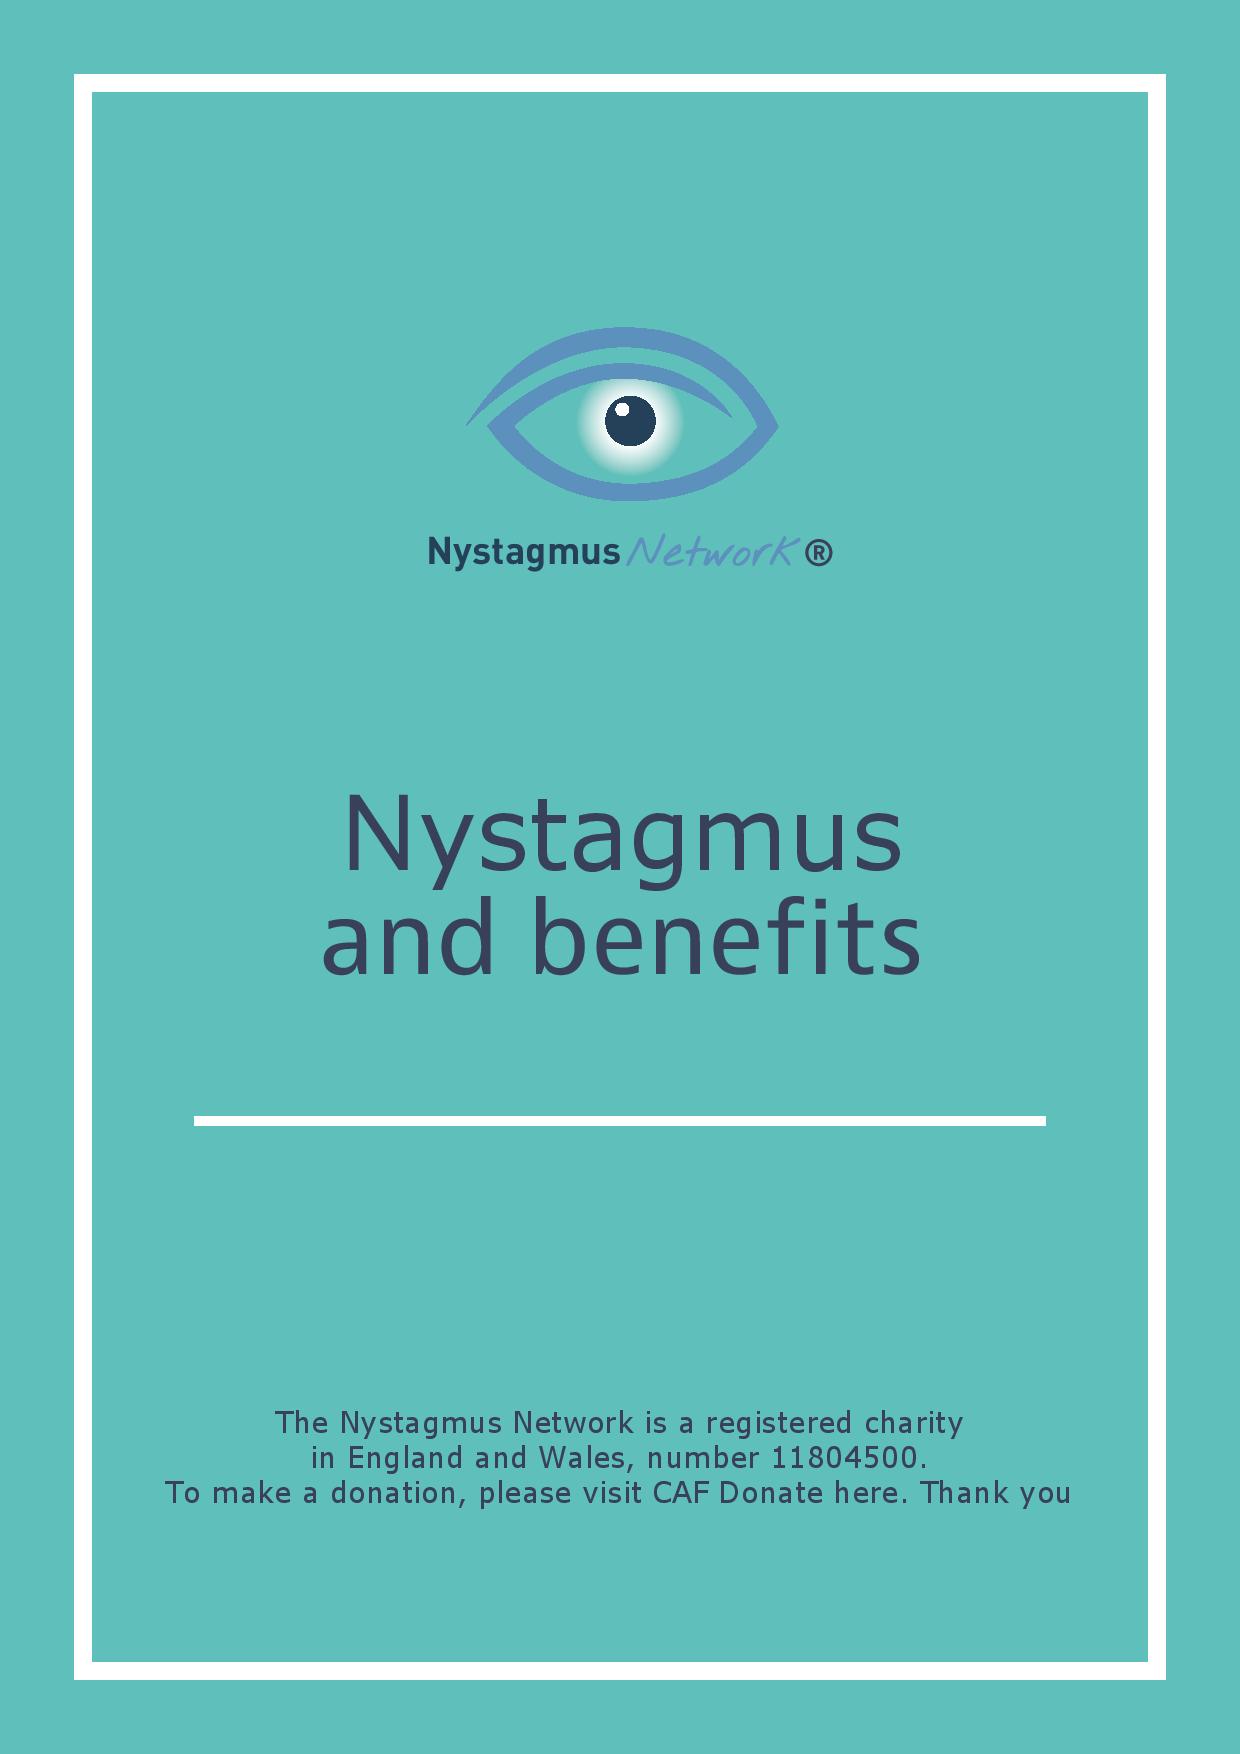 A new guide to nystagmus and benefits